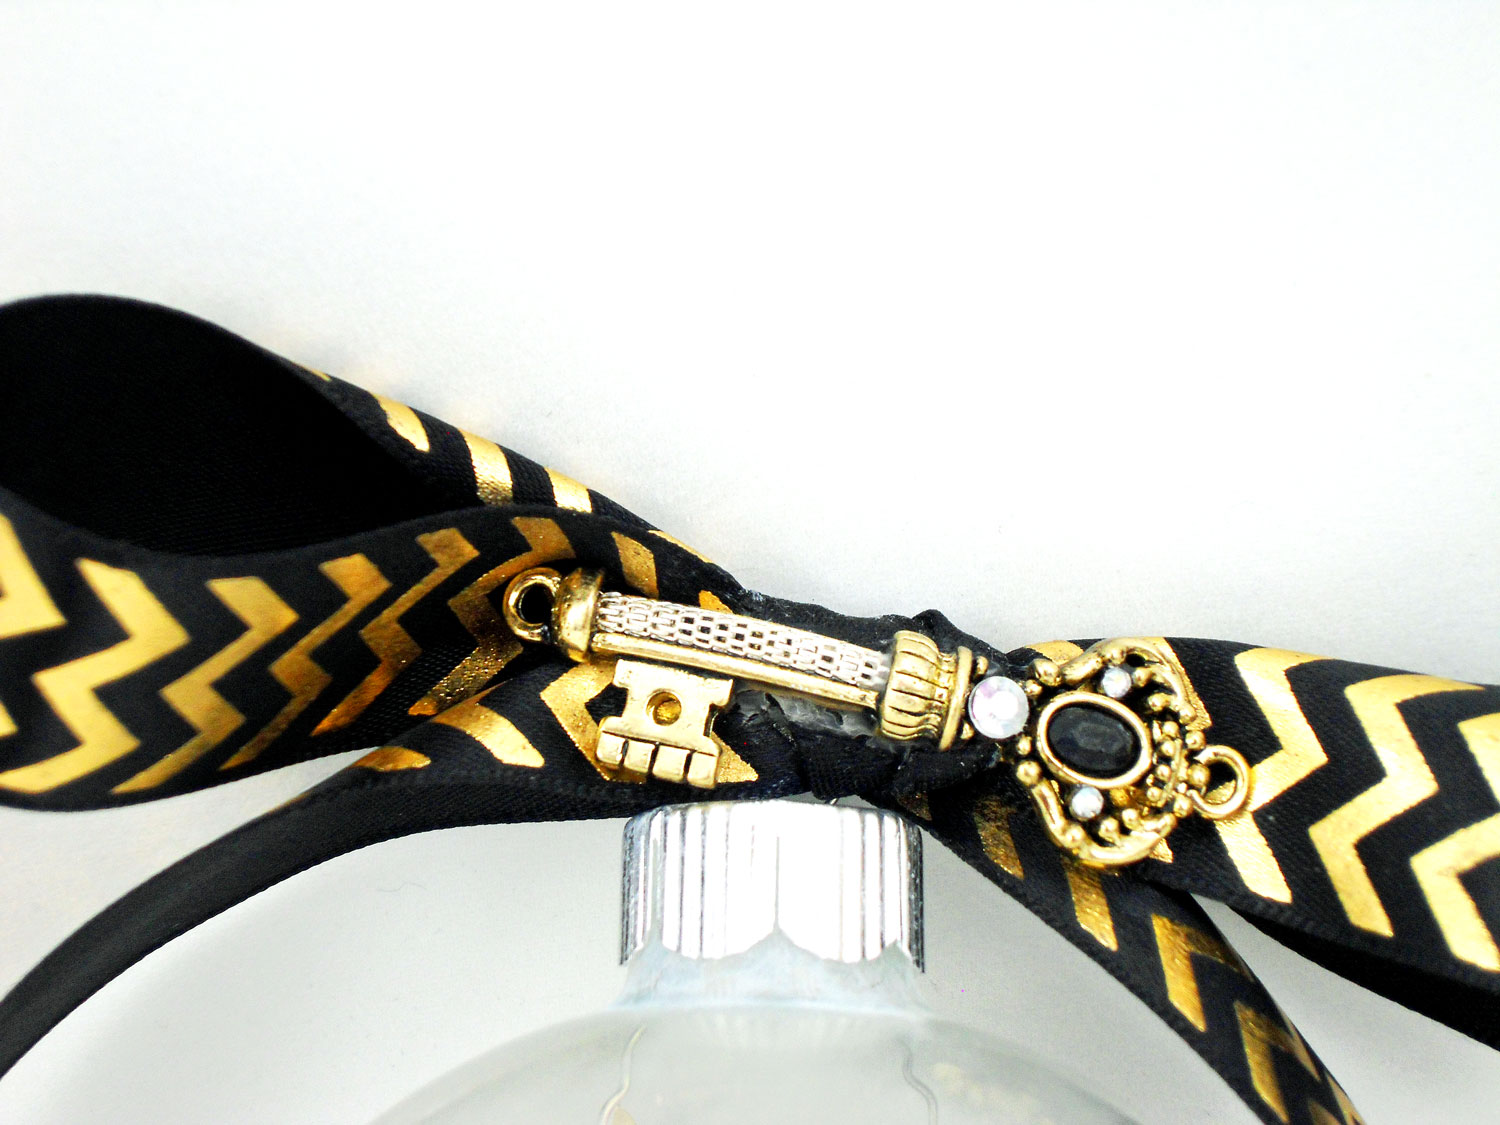 Gold And Black Ribbon And Key Tied To DIY New Home Ornament | OrnamentShop.com